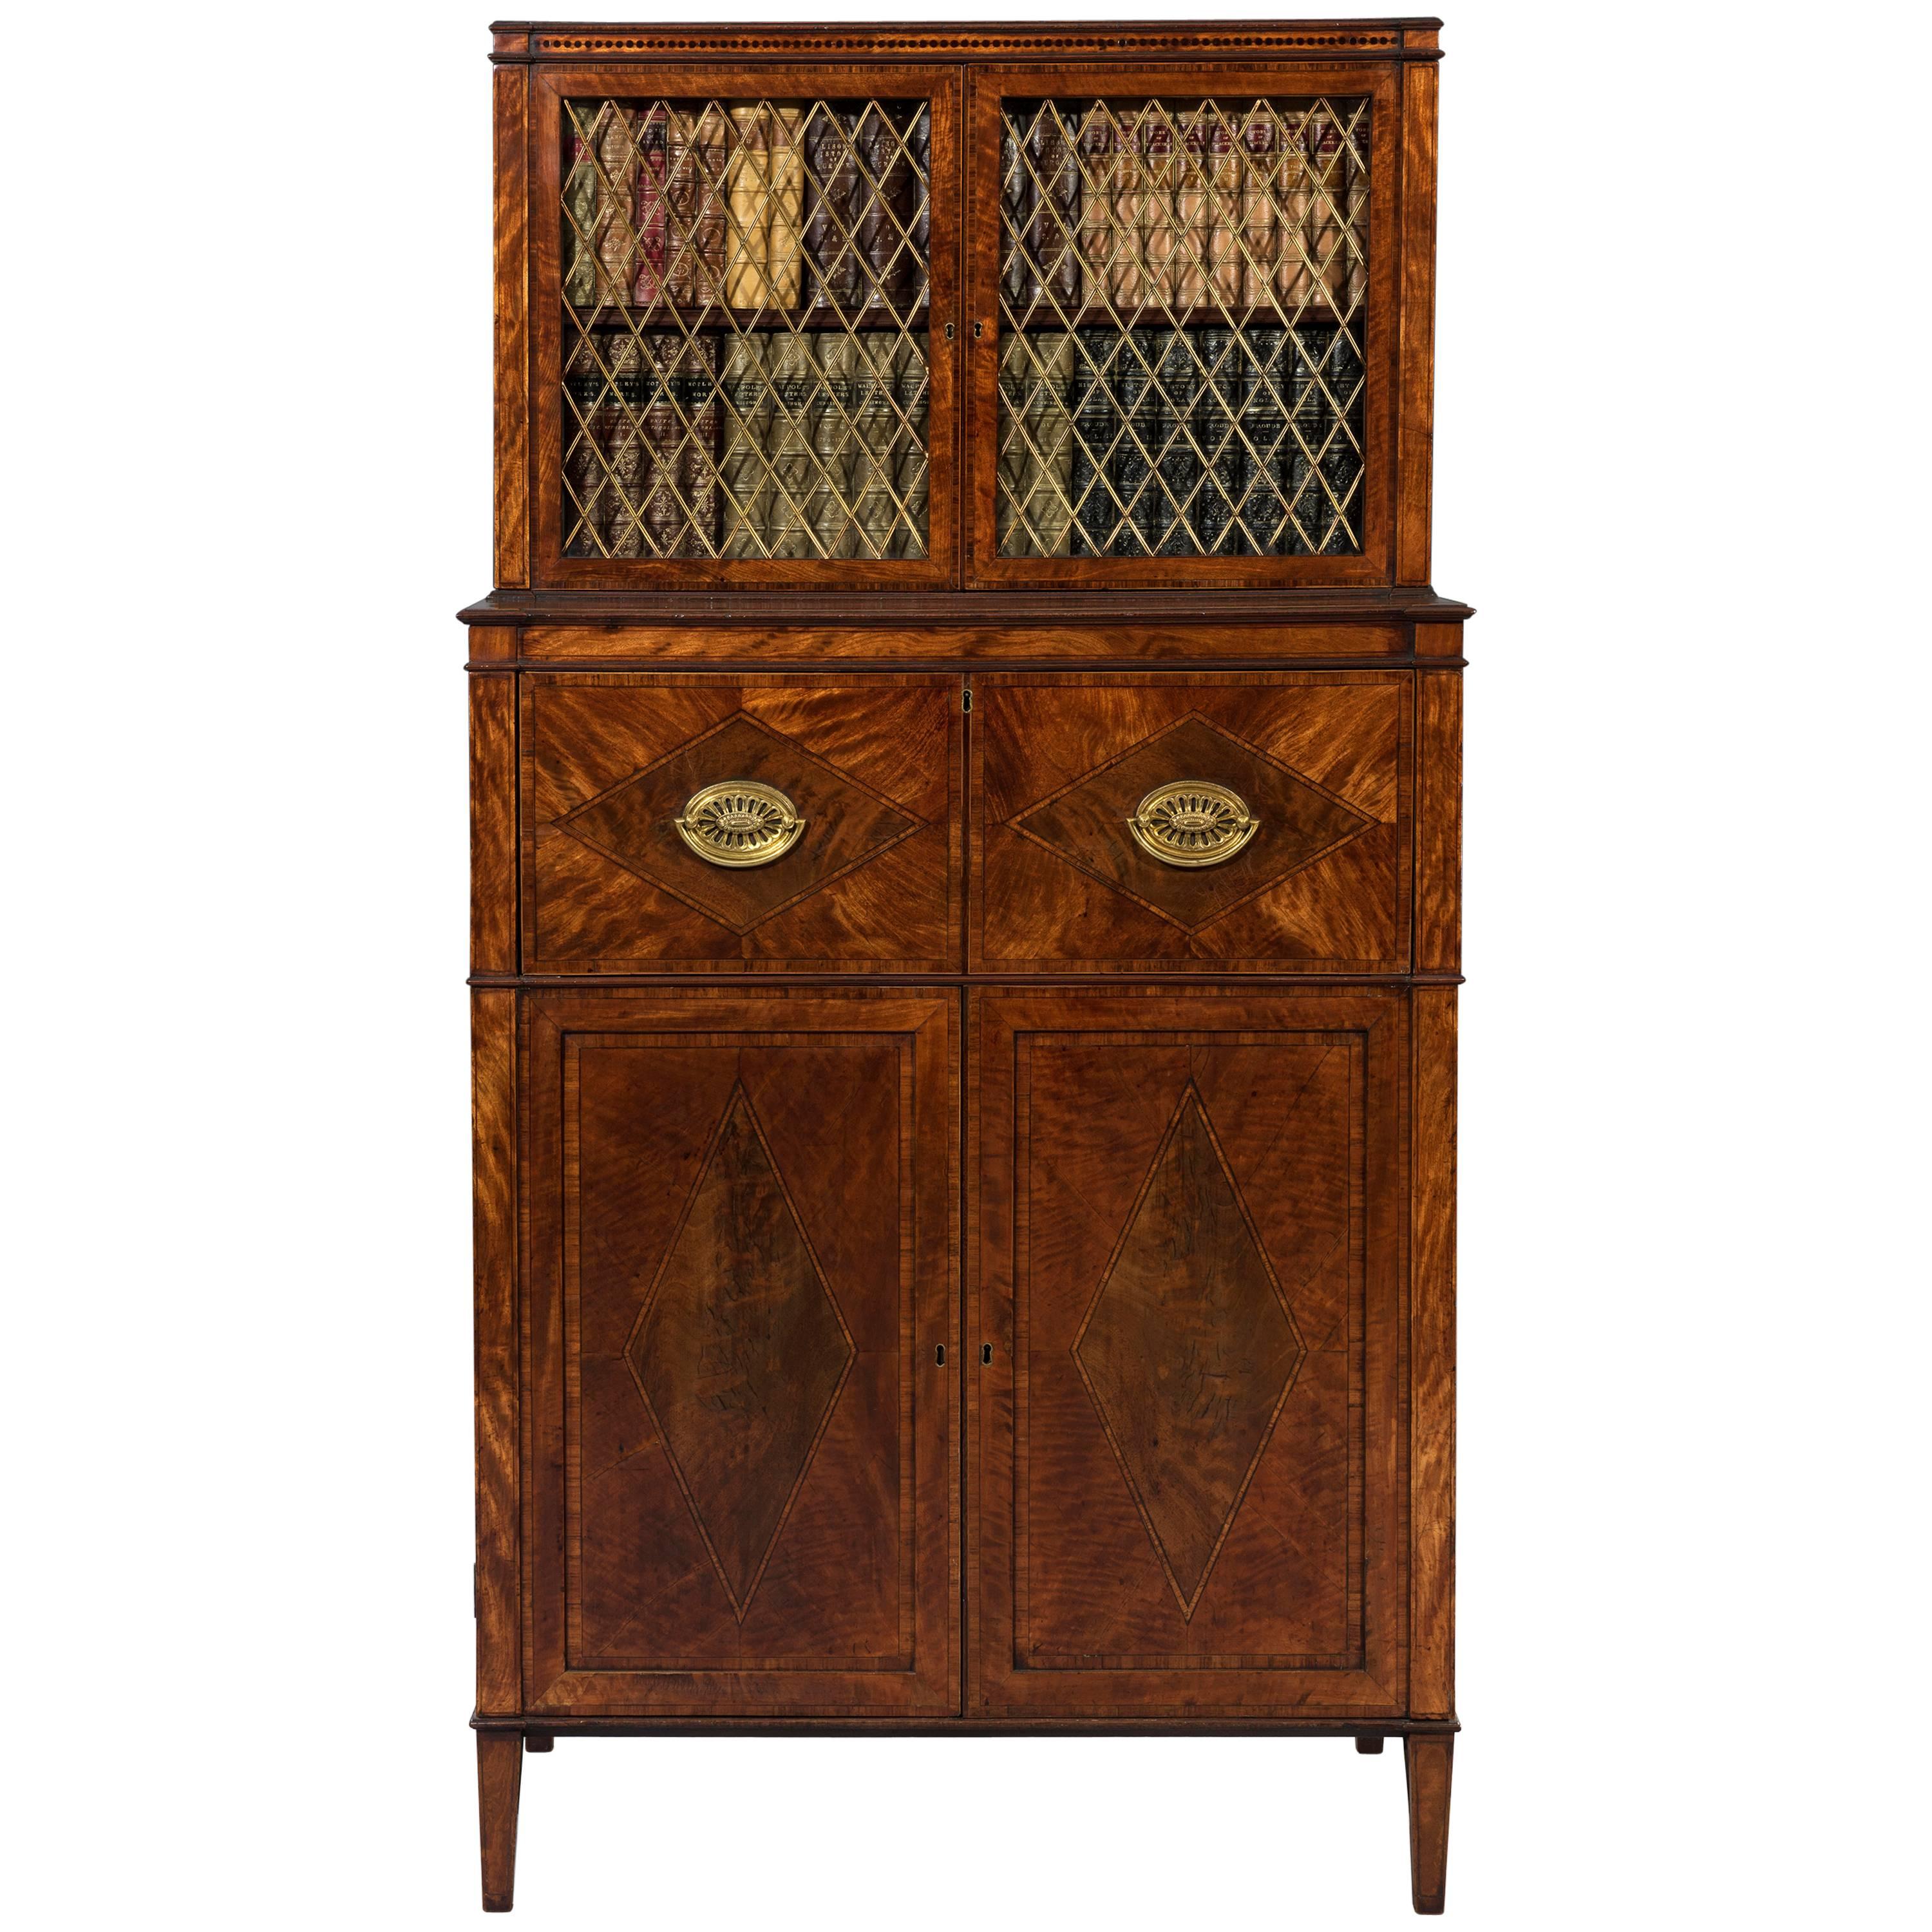 George III Sheraton 18th Century Satinwood Inlaid Secrétaire Dwarf Bookcase For Sale